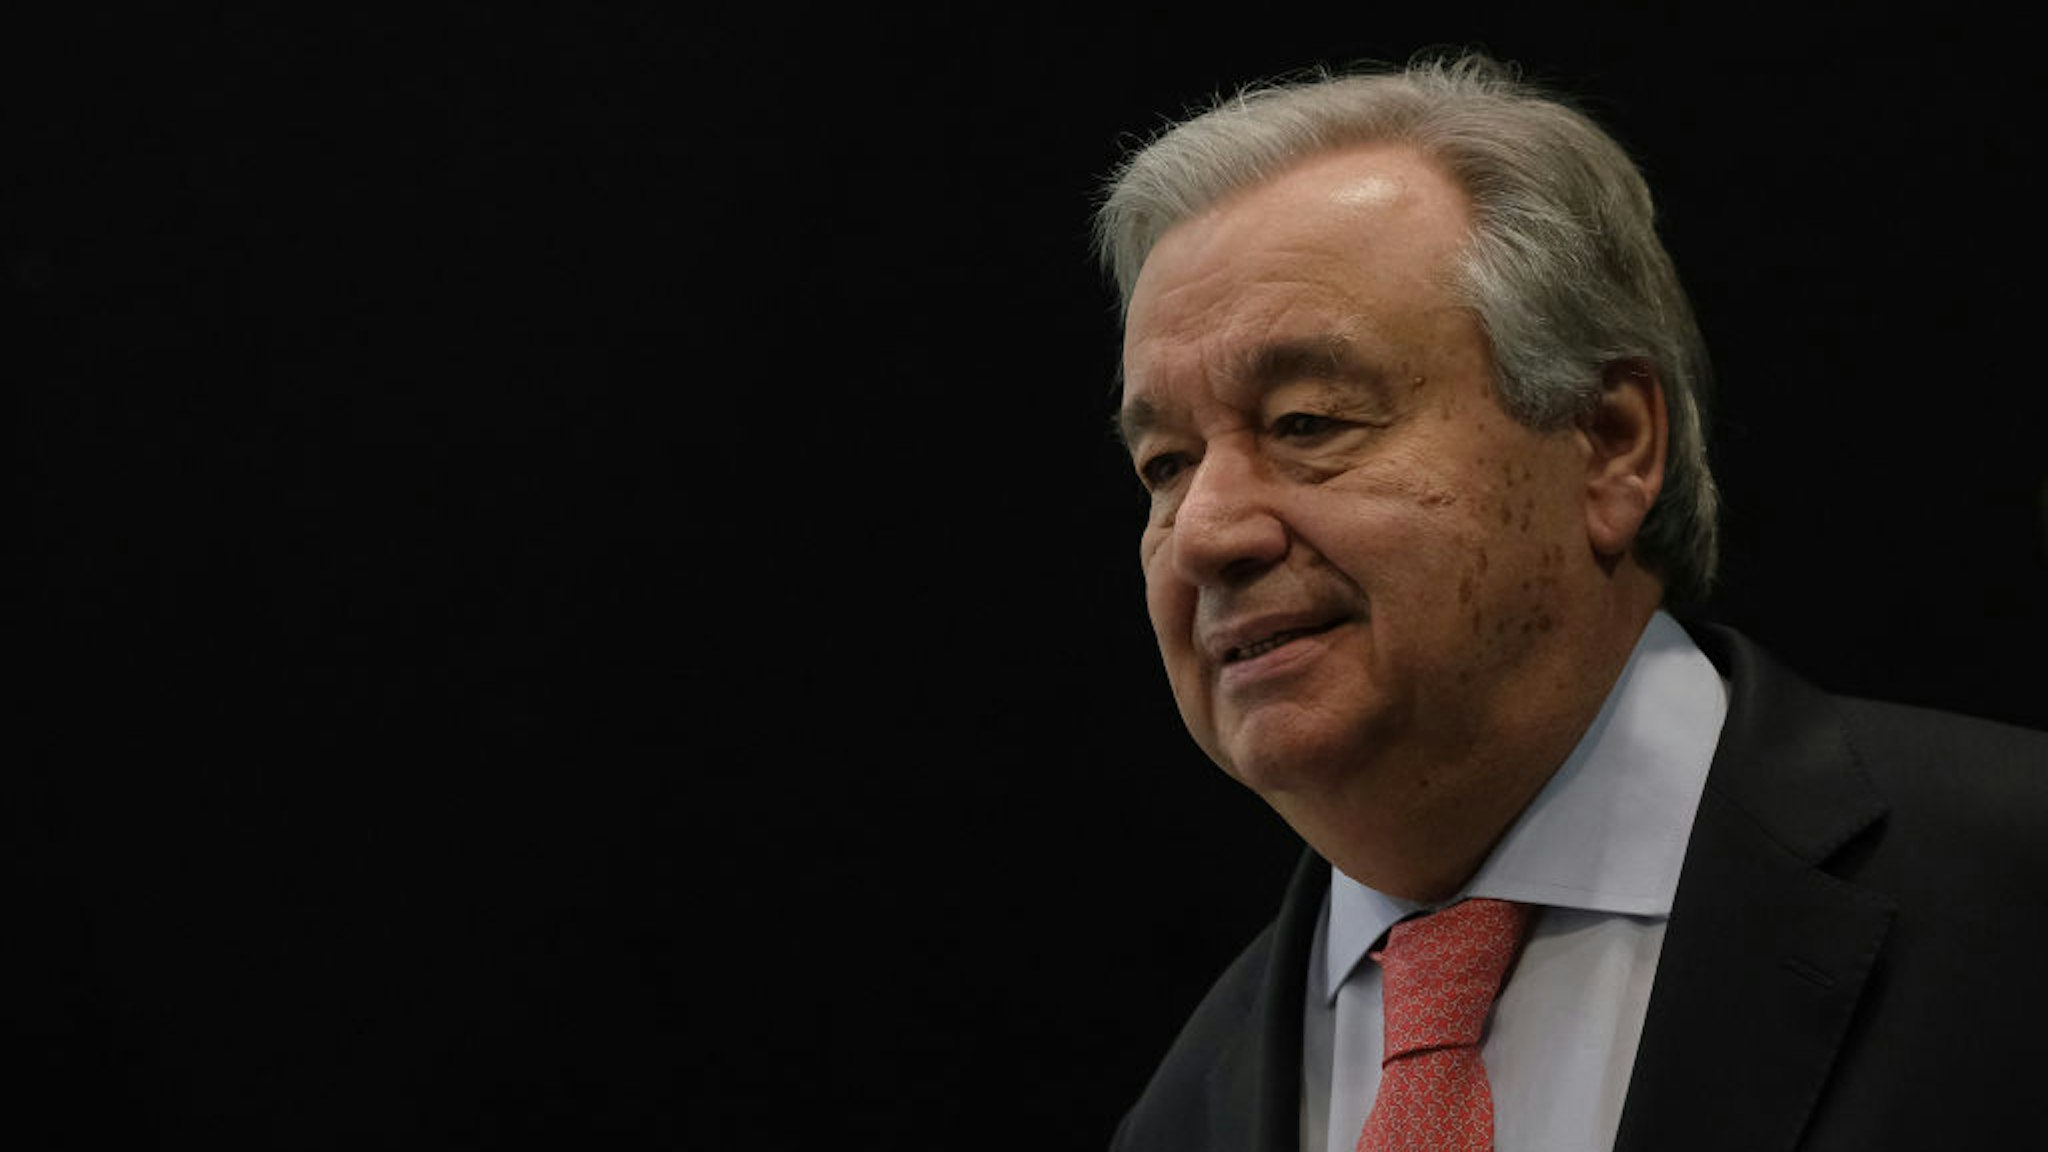 United Nations Secretary-General Antonio Guterres arrives to speak to the media ahead of the UNFCCC COP25 climate conference on December 1, 2019 in Madrid, Spain.